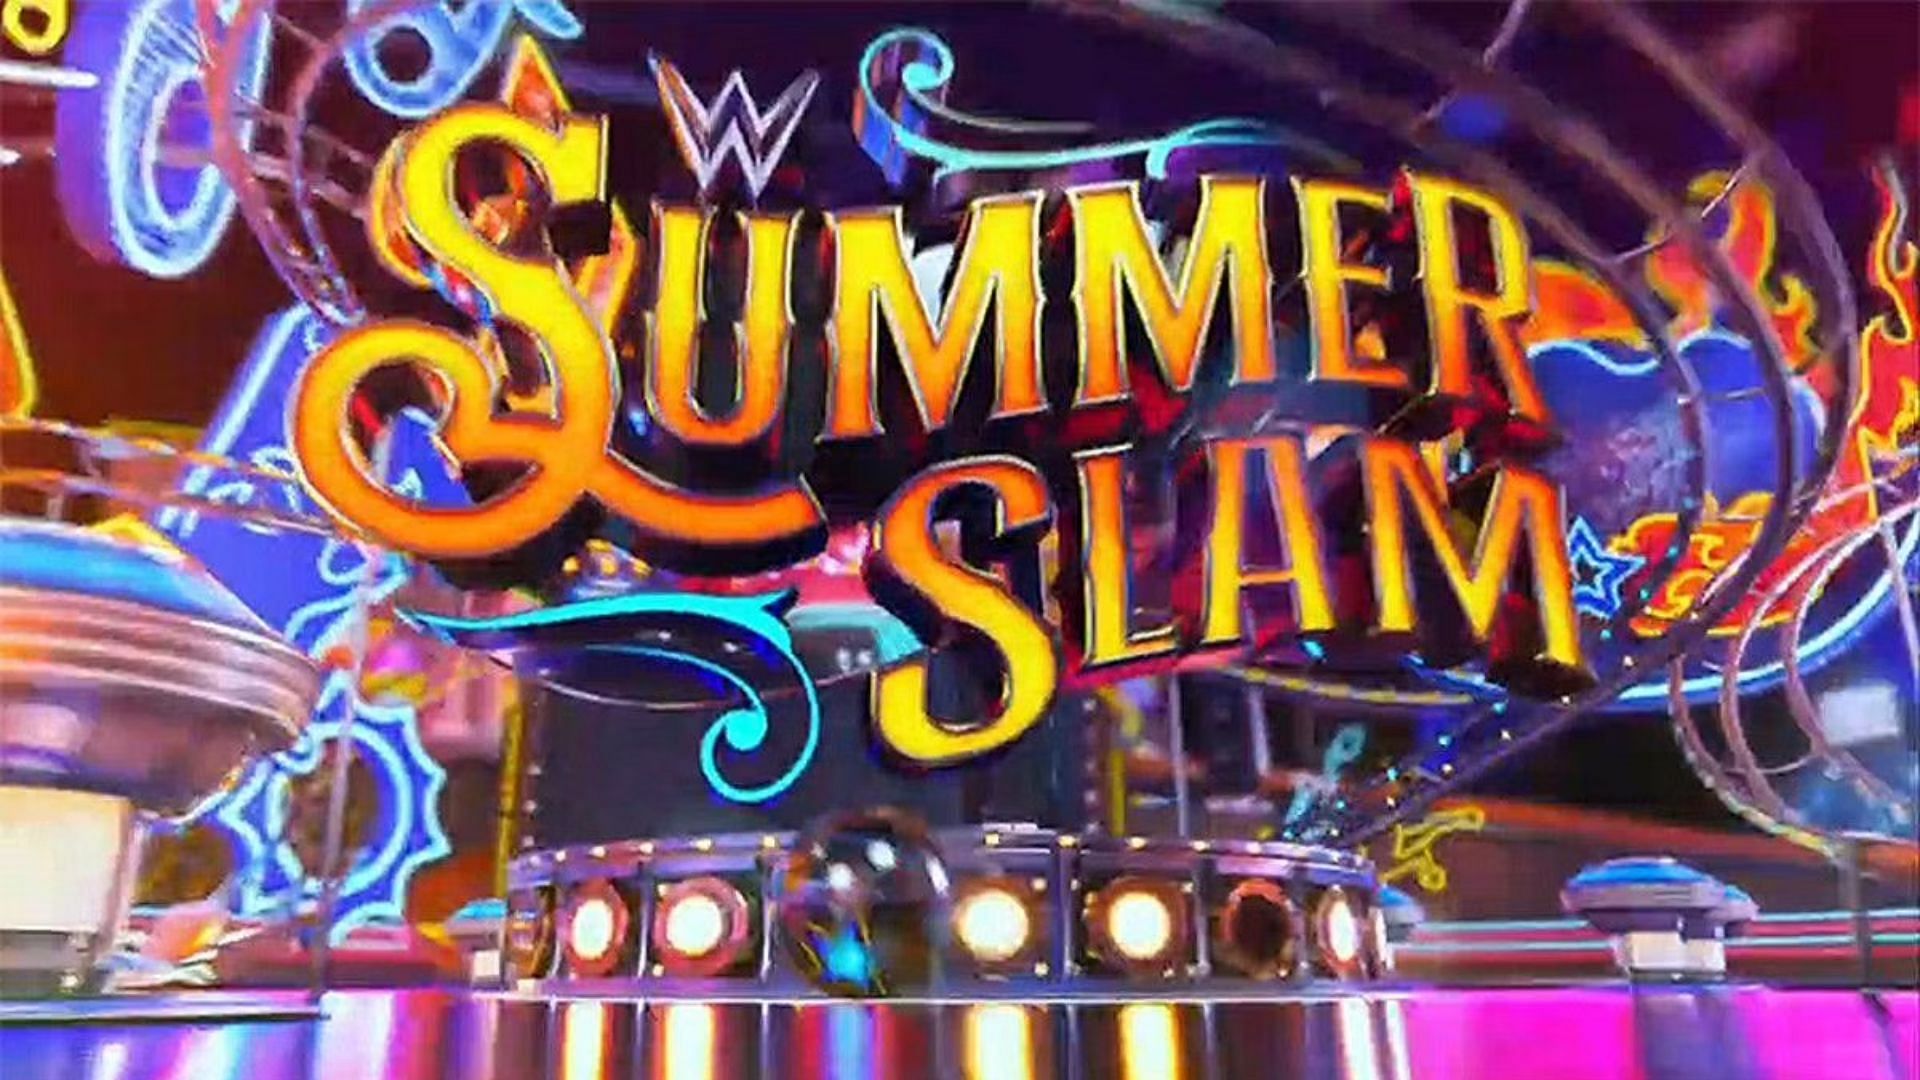 We got an action-packed night on SummerSlam tonight!